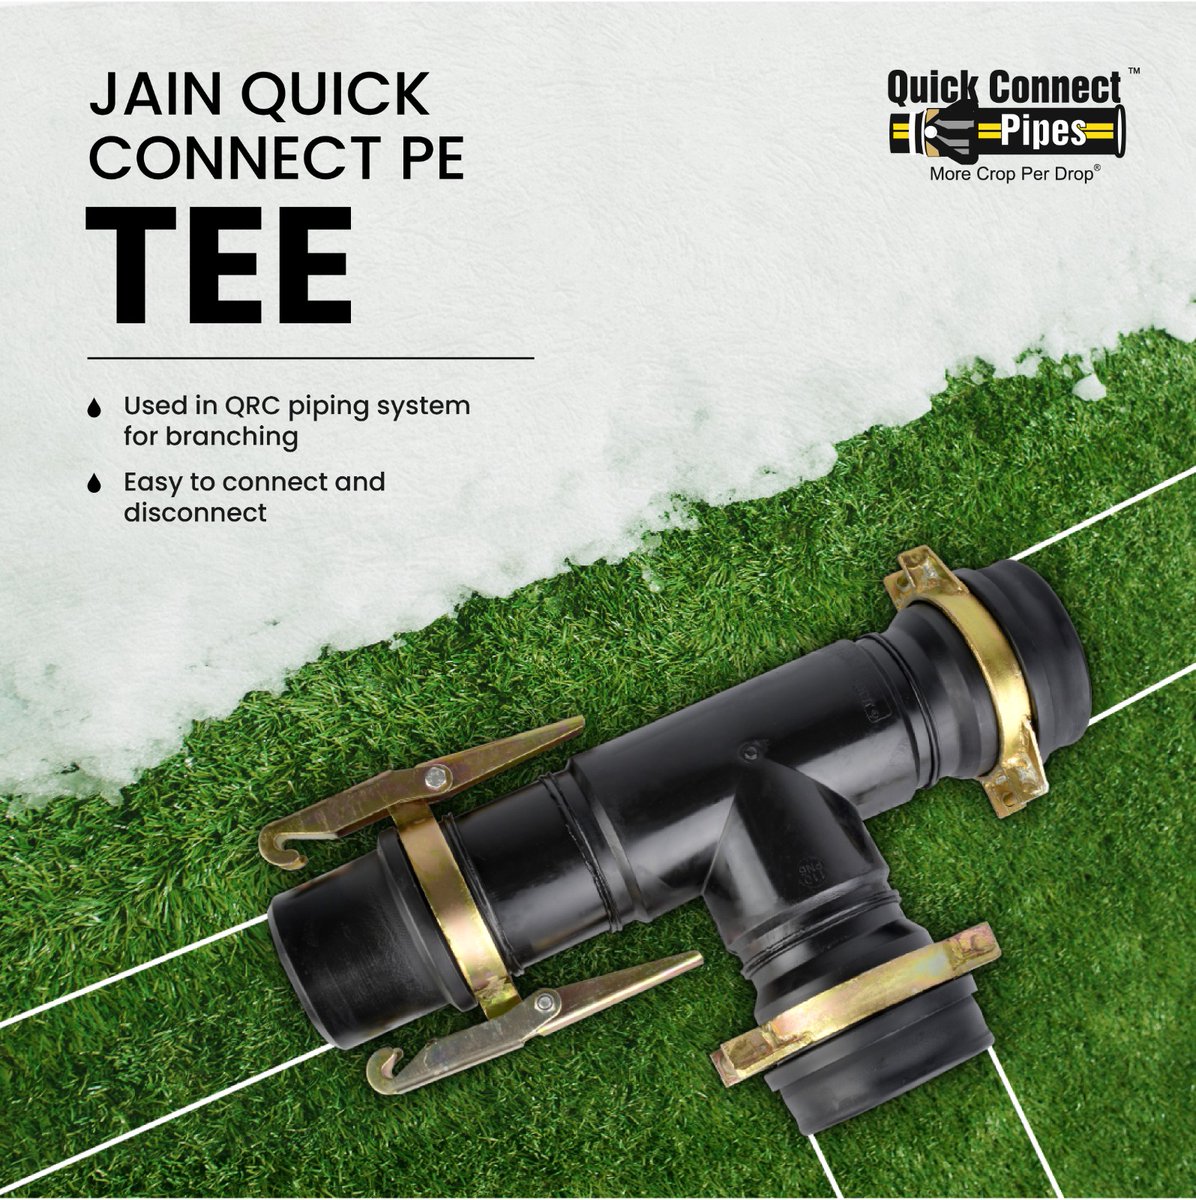 ✨ Revolutionize Your Irrigation: Introducing the Jain Quick Connect PE Tee! 🌱 Maximize Your Yield with Efficiency and Ease of Use. Upgrade to QRC Piping for Seamless Branching and Save Water While Boosting Crop Production. 💧🛠️

#morecropperdrop  #smartirrigation #JainPipes…